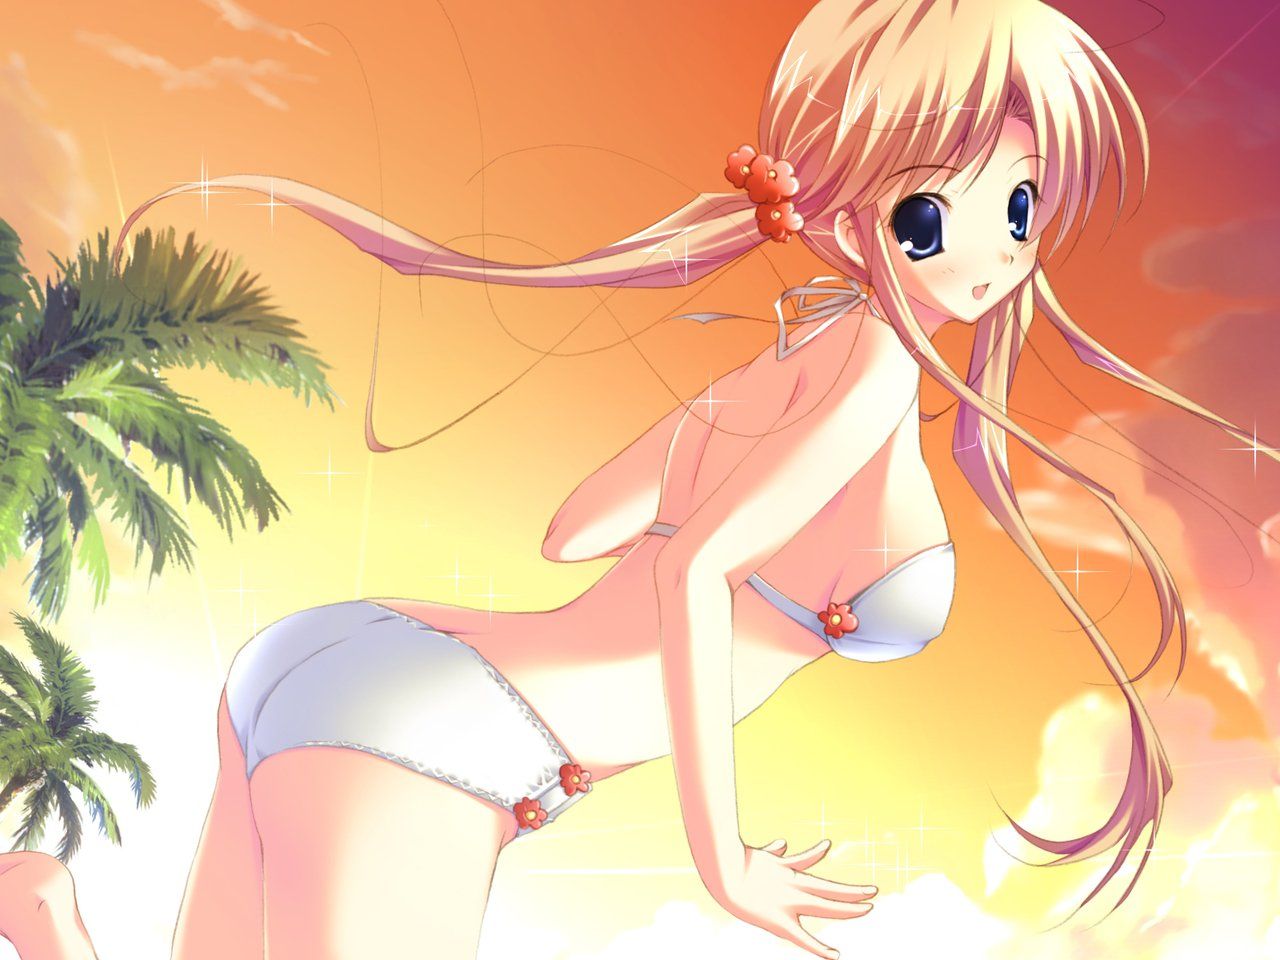 [2nd] Secondary image of a cute girl in swimsuit part 8 [swimsuit, non-erotic] 6